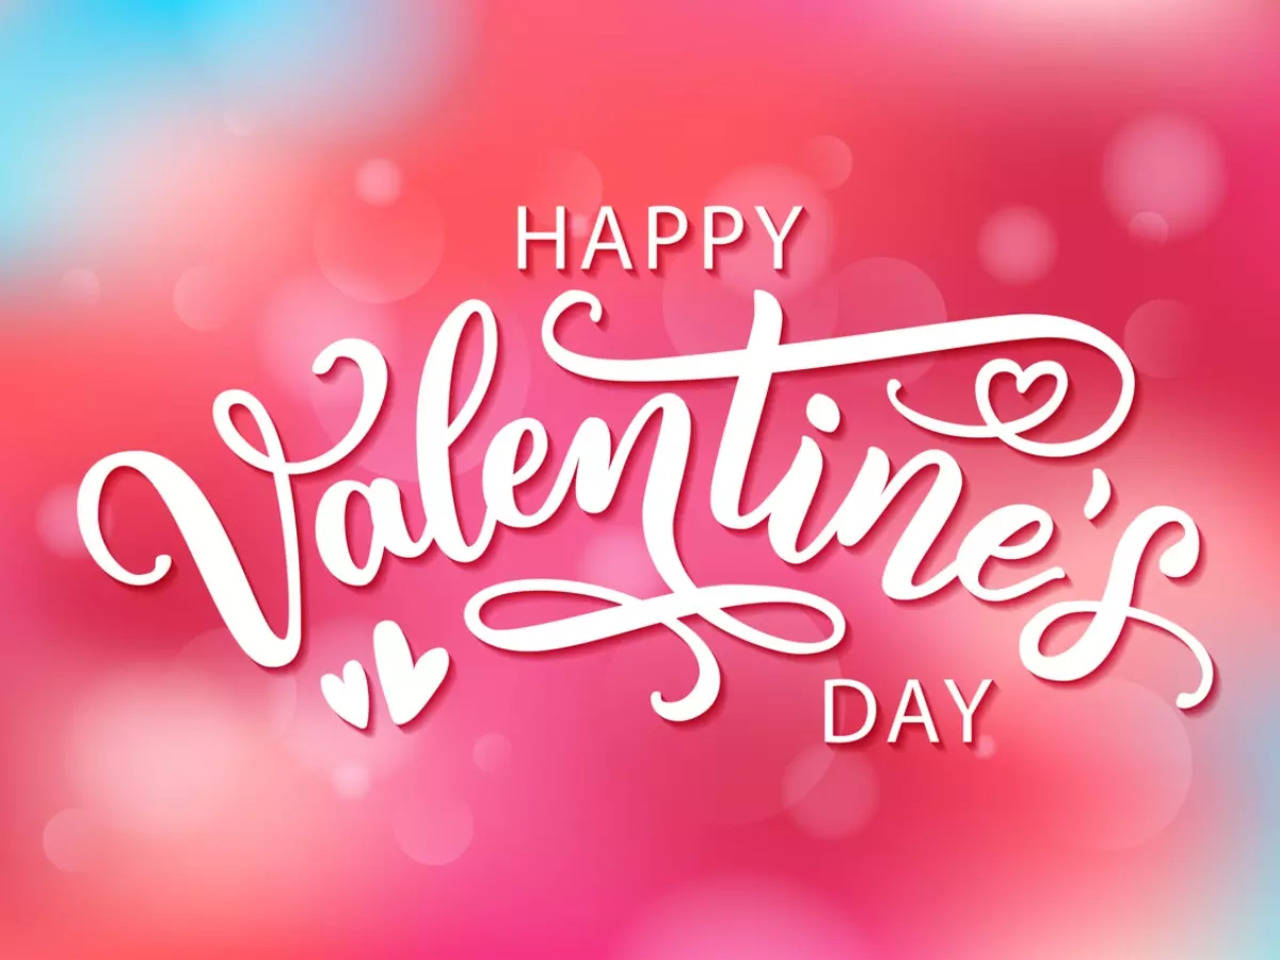 Happy Valentines Day 2023 51 Best Valentines Day Wishes and Messages for girlfriend, boyfriend, husband and wife pic